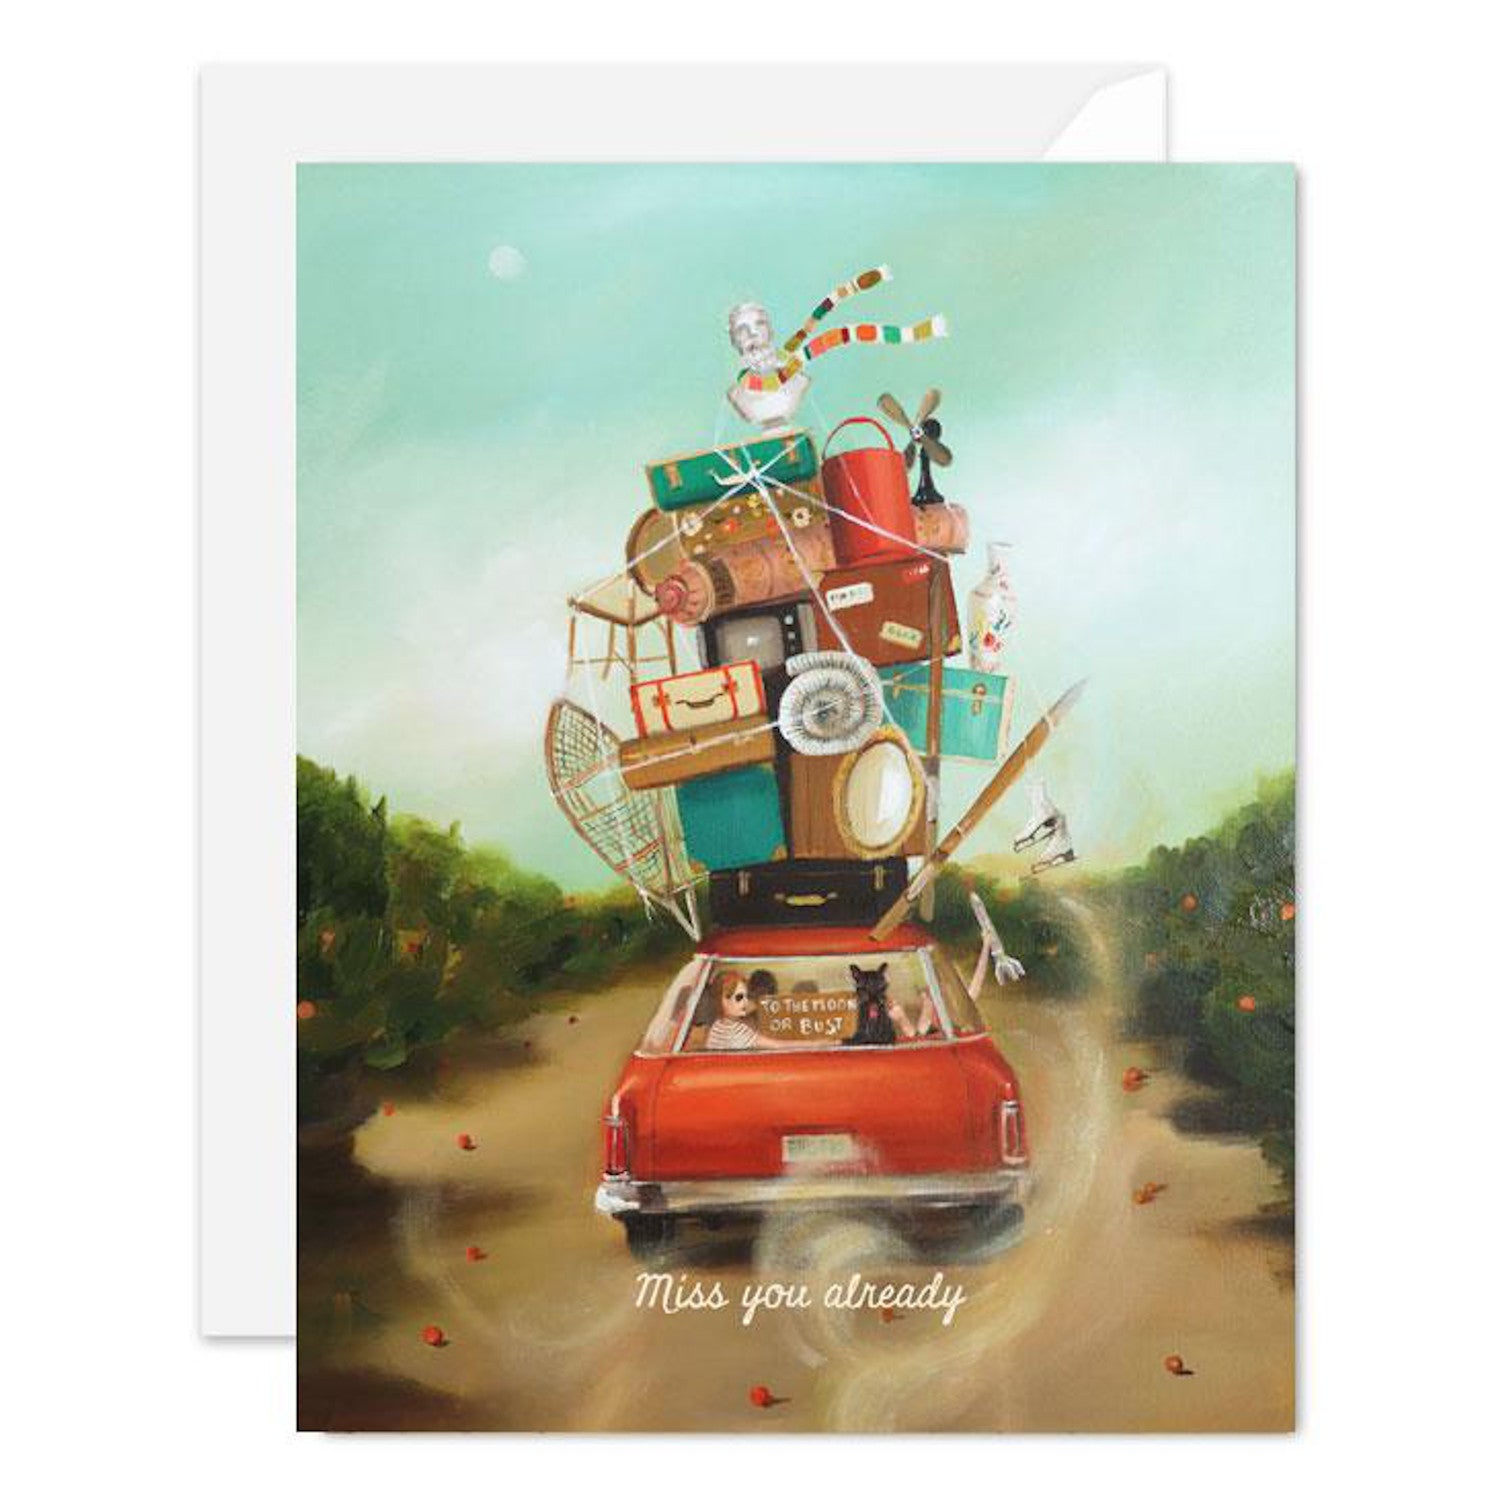 An illustration of a car packed with belongings and people, on a journey, featuring the Miss You Already Card at the bottom. This card showcases Janet Hill&